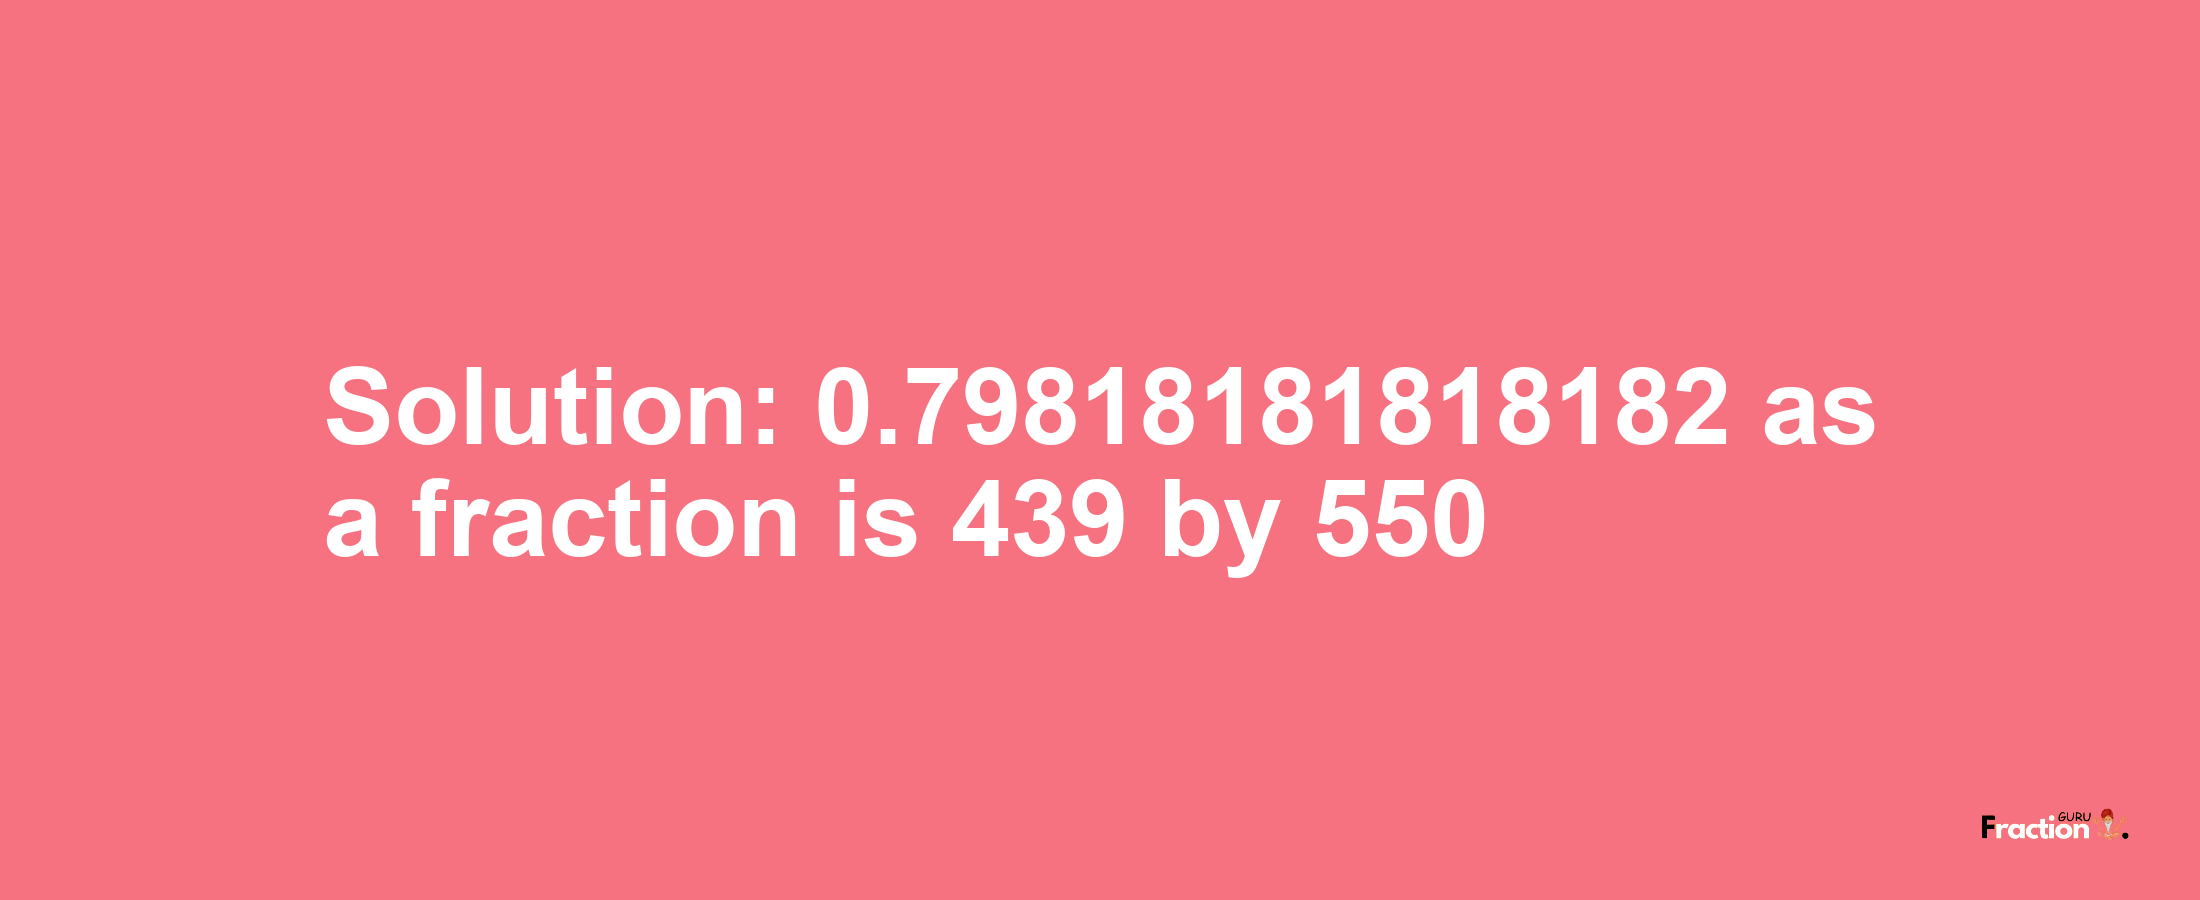 Solution:0.79818181818182 as a fraction is 439/550